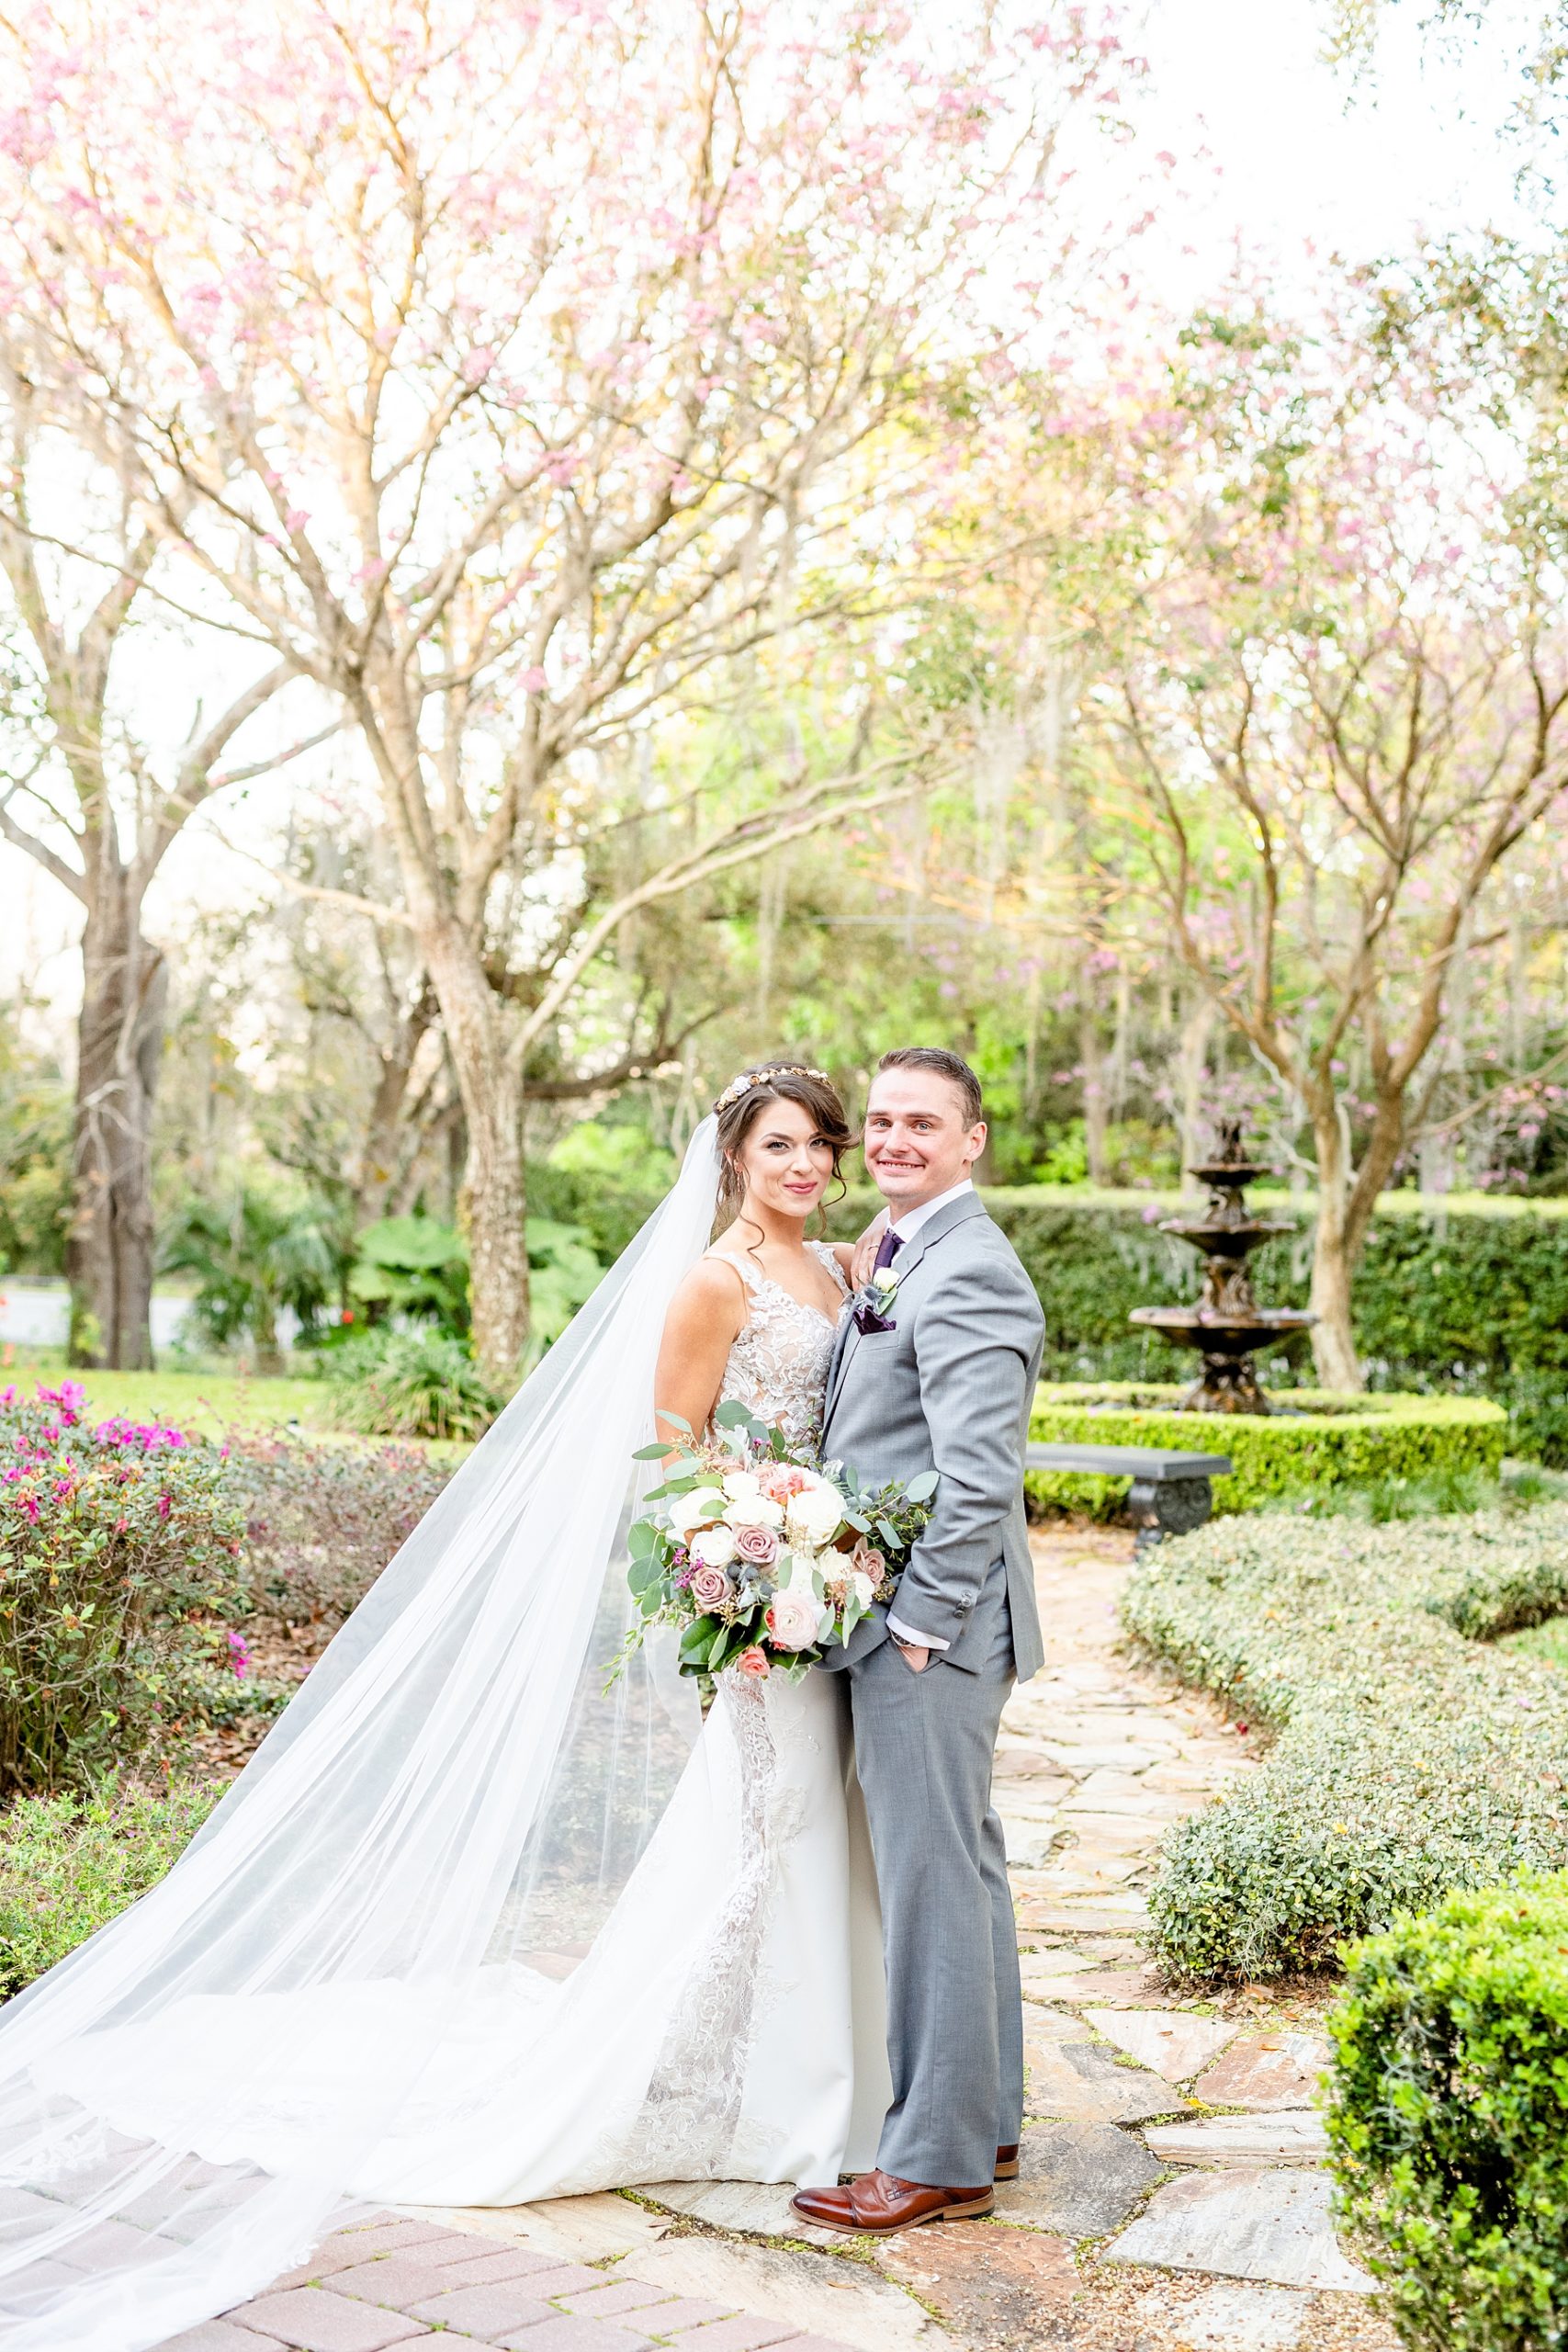 Wedding Photographer in Florida | Town Manor | Chynna Pacheco Photography